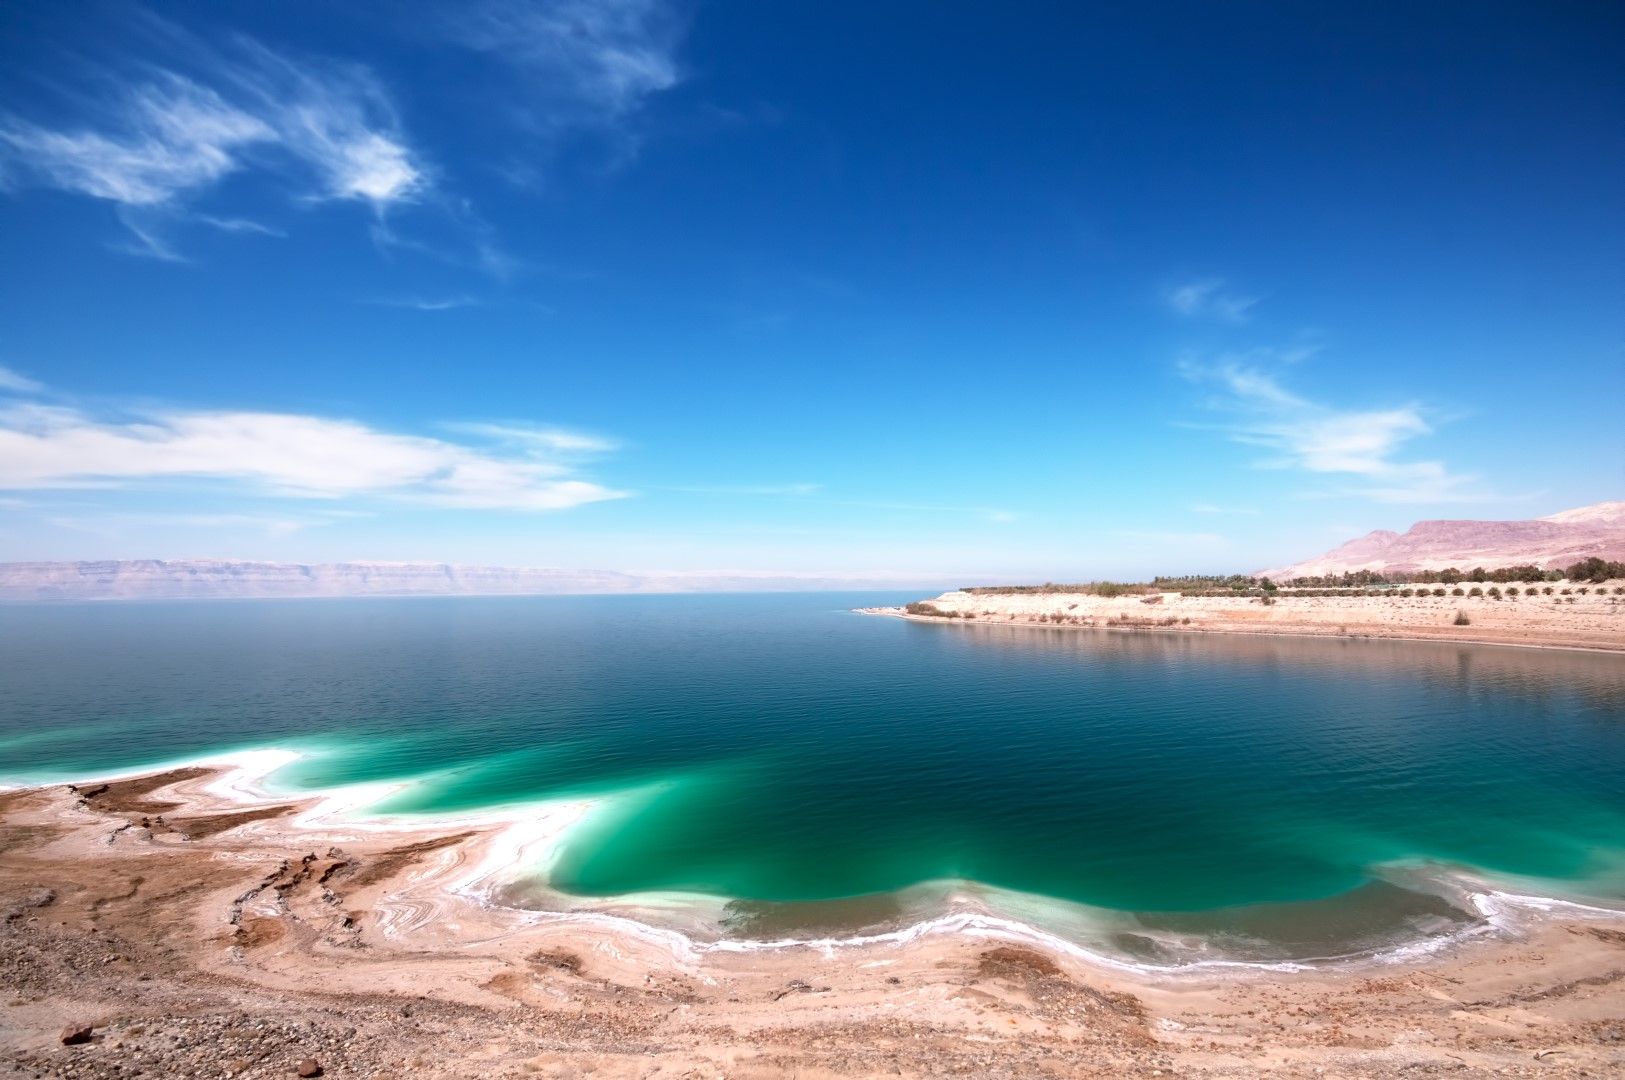 Why is the Dead Sea disappearing?